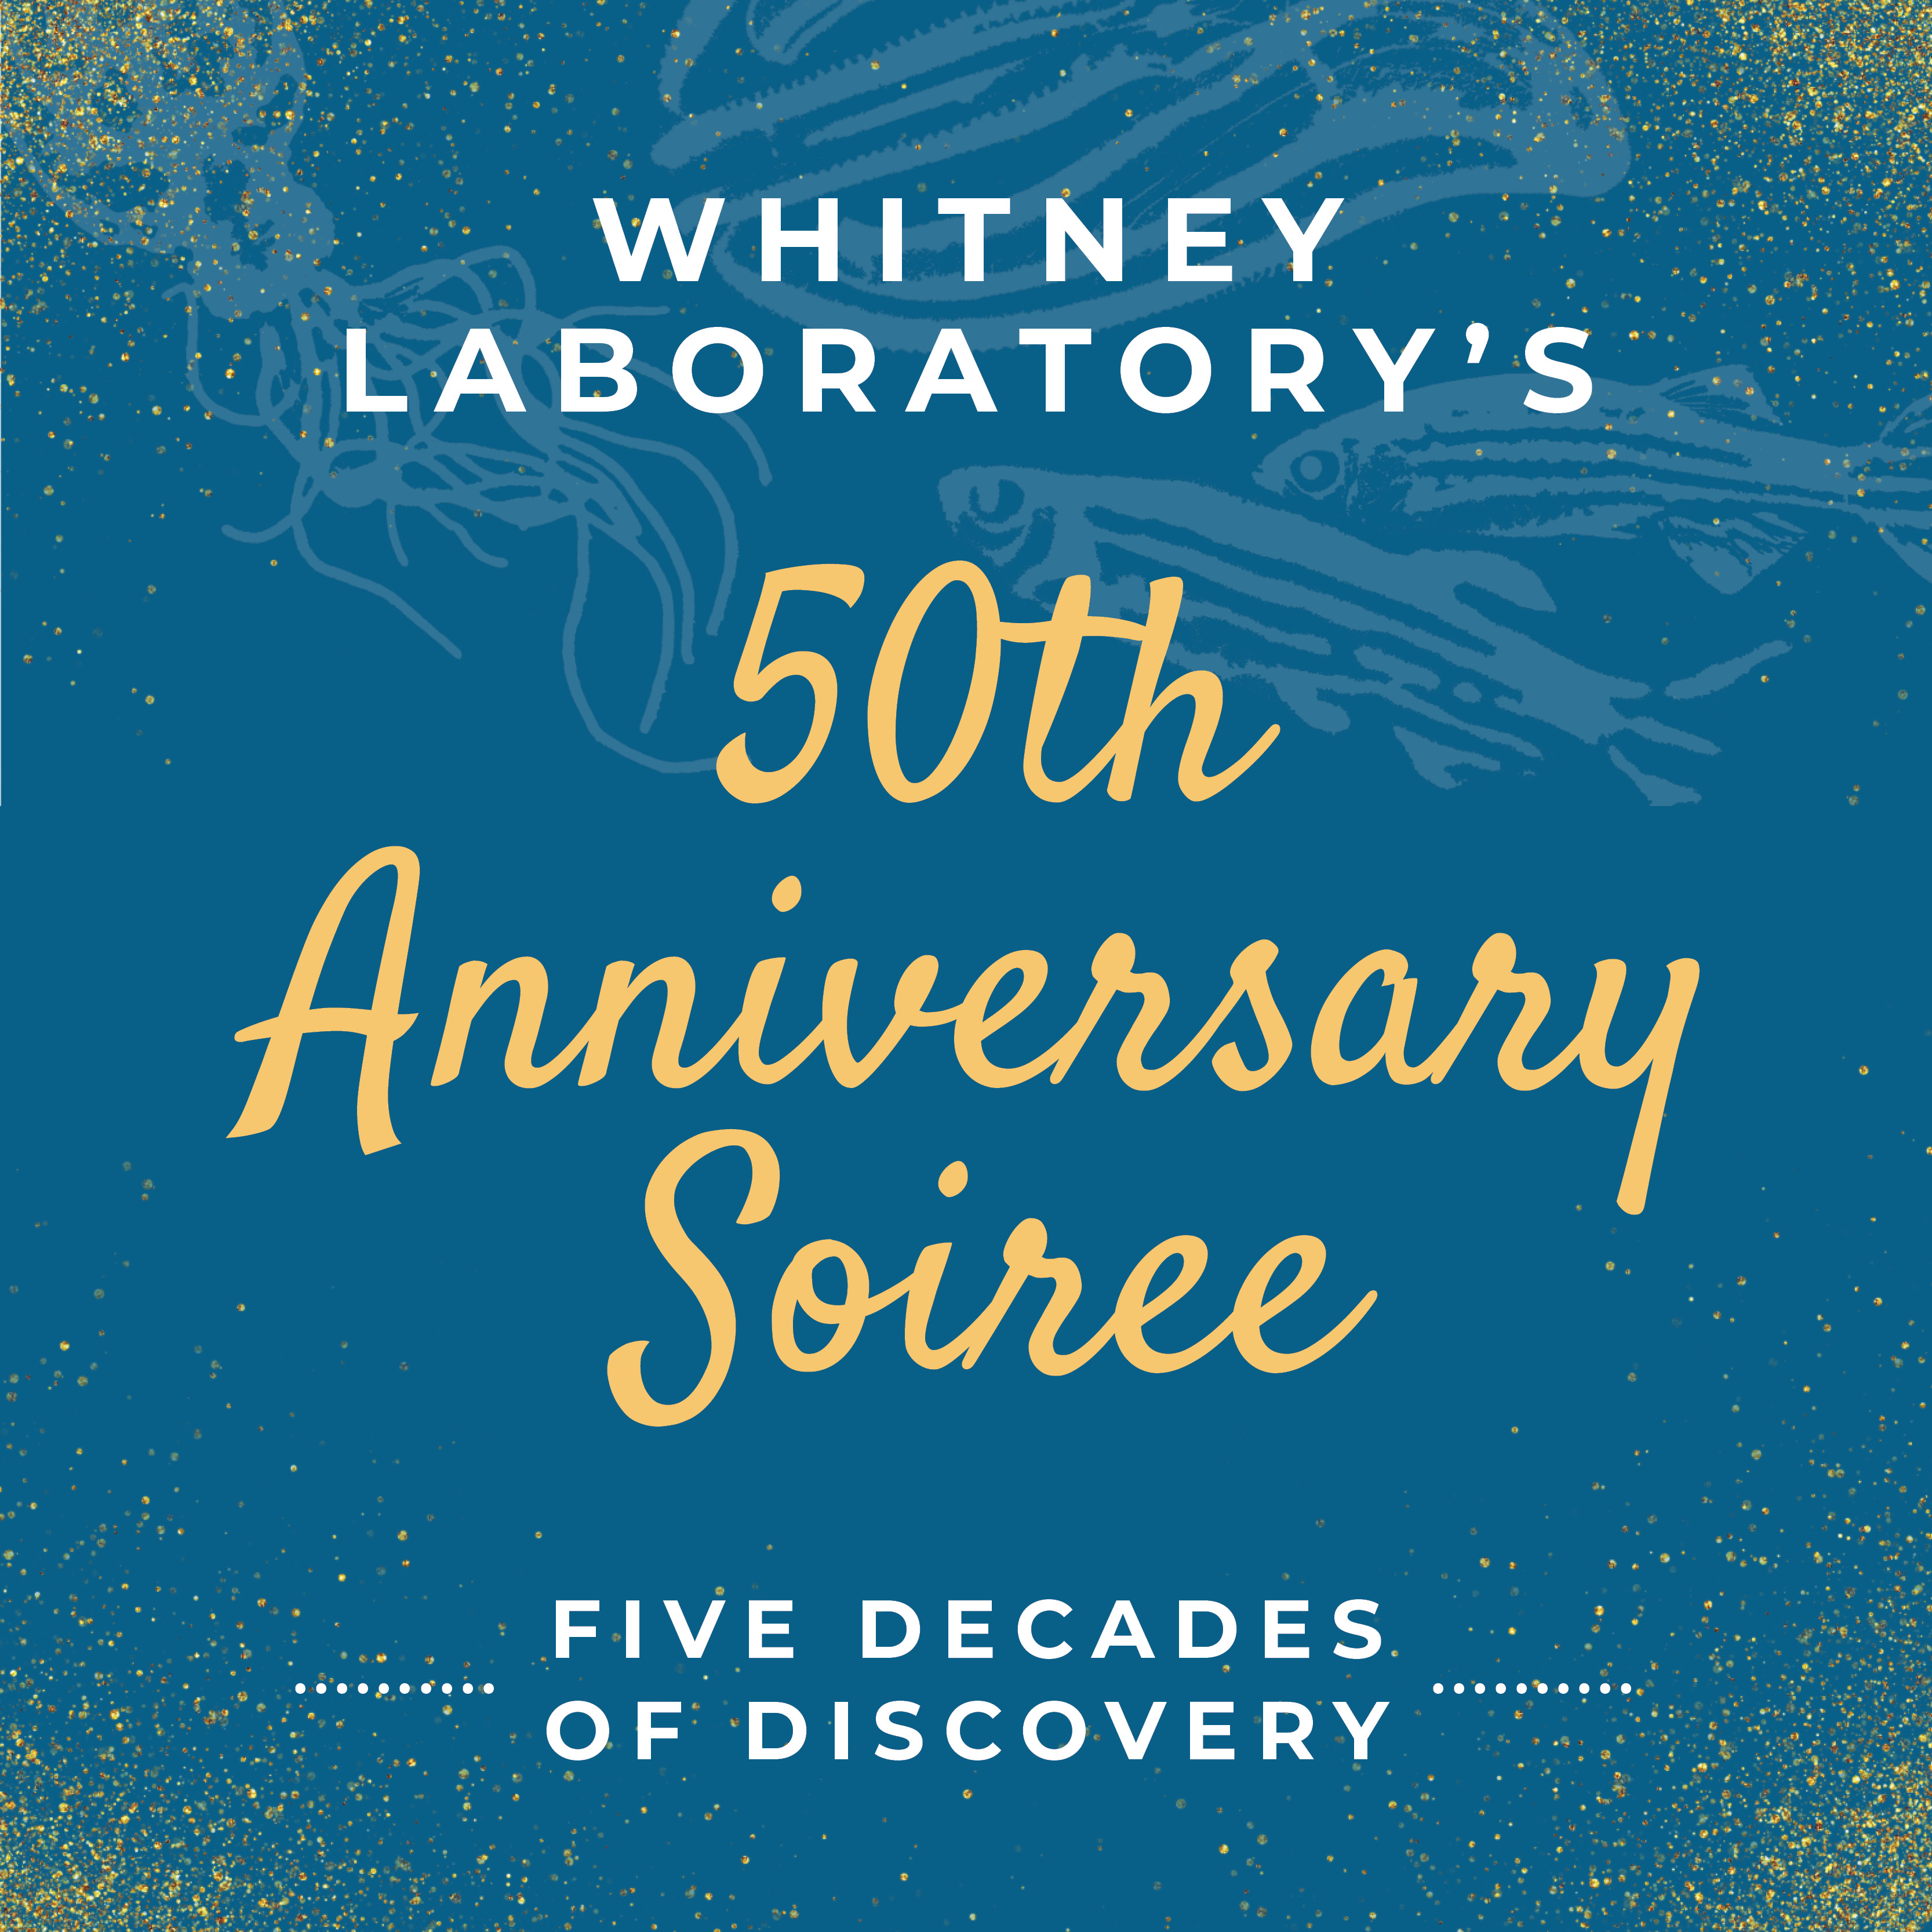 Join us for Whitney Laboratory's 50th Anniversary Soiree April 12!